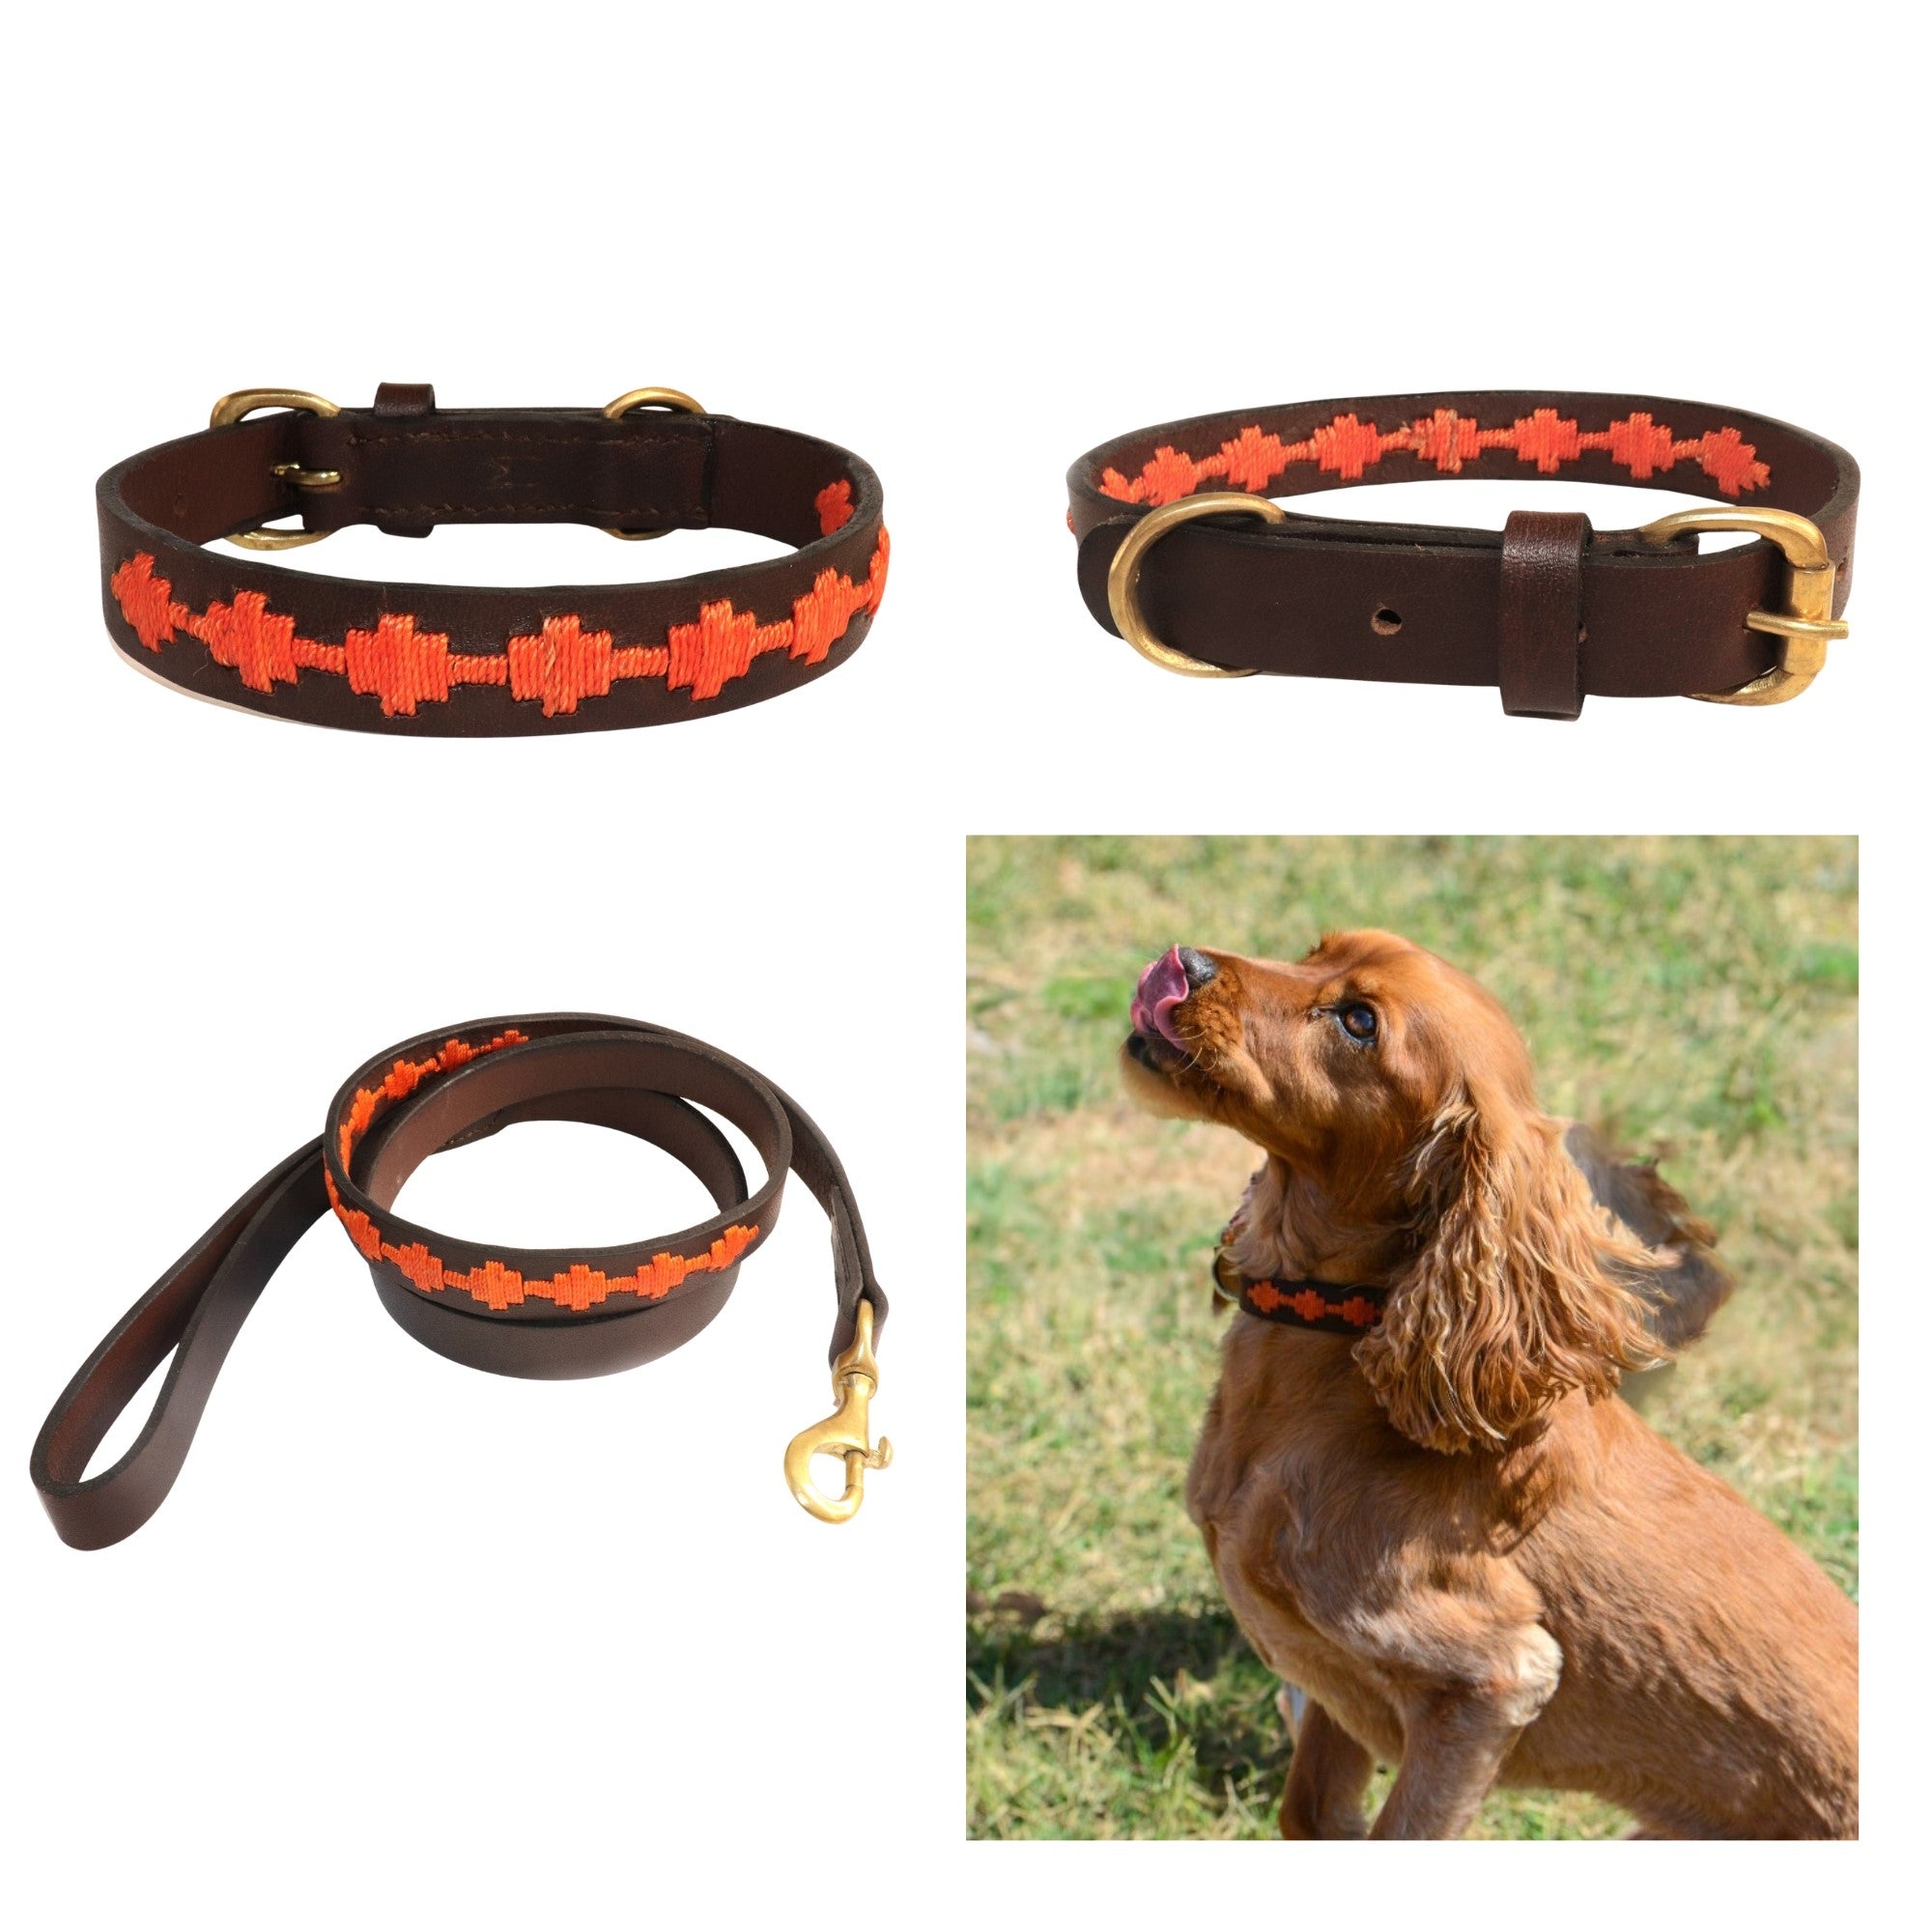 Collage of images featuring dog accessories and a dog. Top left and right show a brown Buffalo Leather dog collar with red geometric patterns. Bottom left displays a matching leash with brass hardware. Bottom Georgie Paws Polo Bark Collar - ochre pack.